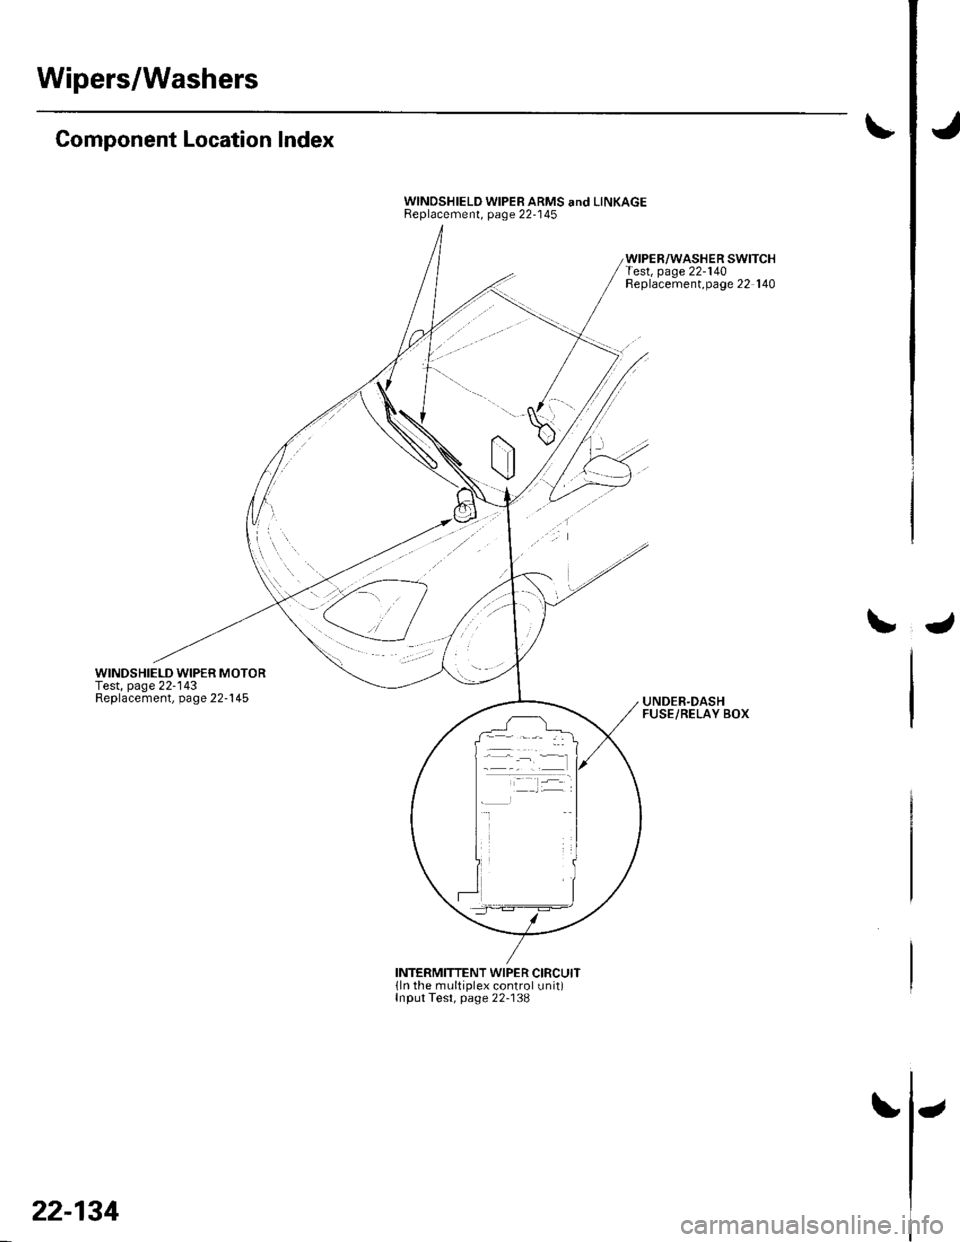 HONDA CIVIC 2002 7.G Workshop Manual Wipers/Washers
Component Location Index
WINDSHIELD WIPER MOTORTest, page 22-143Replacement, page 22-145
WINDSHIELD WIPER ARMS and LINKAGEReplacement, page 22-145
WIPER/WASHER SWITCHTest, page 22-140